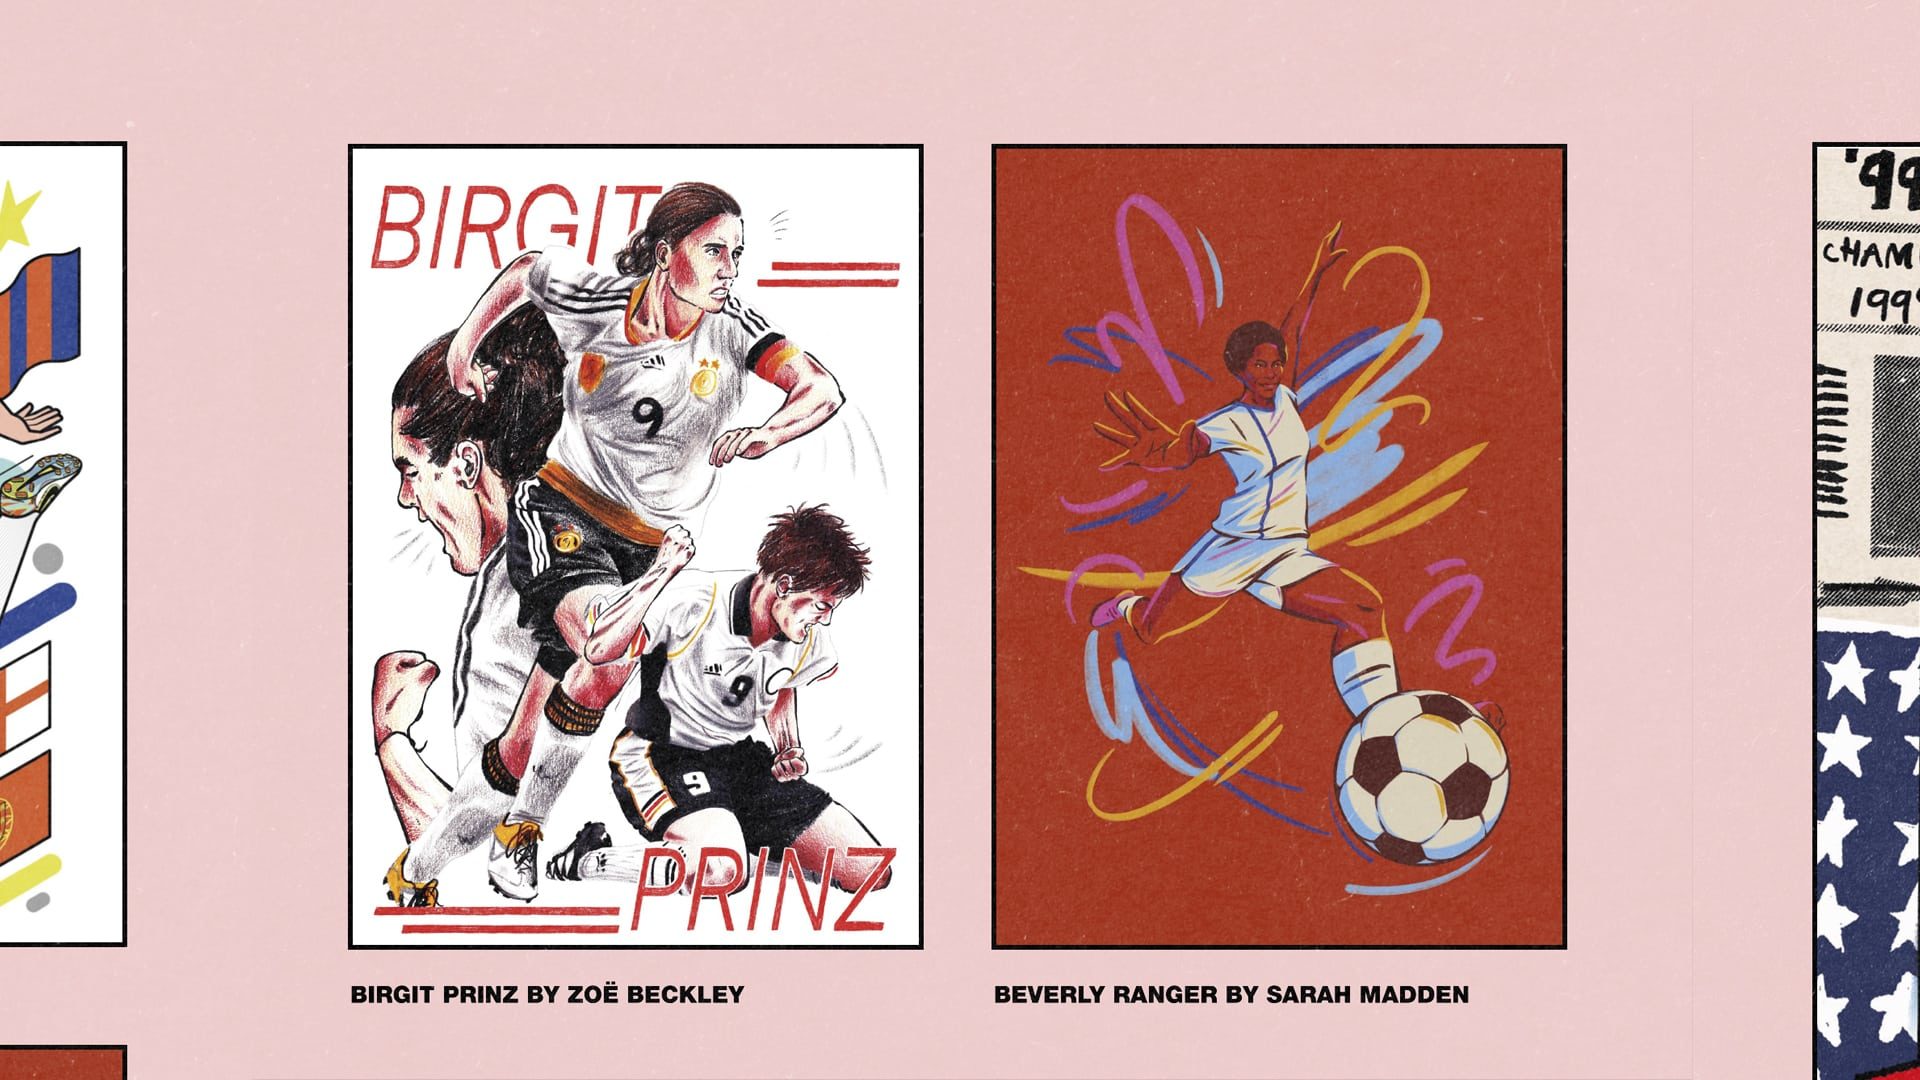 Illustrations from the Forward Play exhibition featuring Birgit Prinz by Zöe Beckley and Beverly Ranger by Sarah Madden